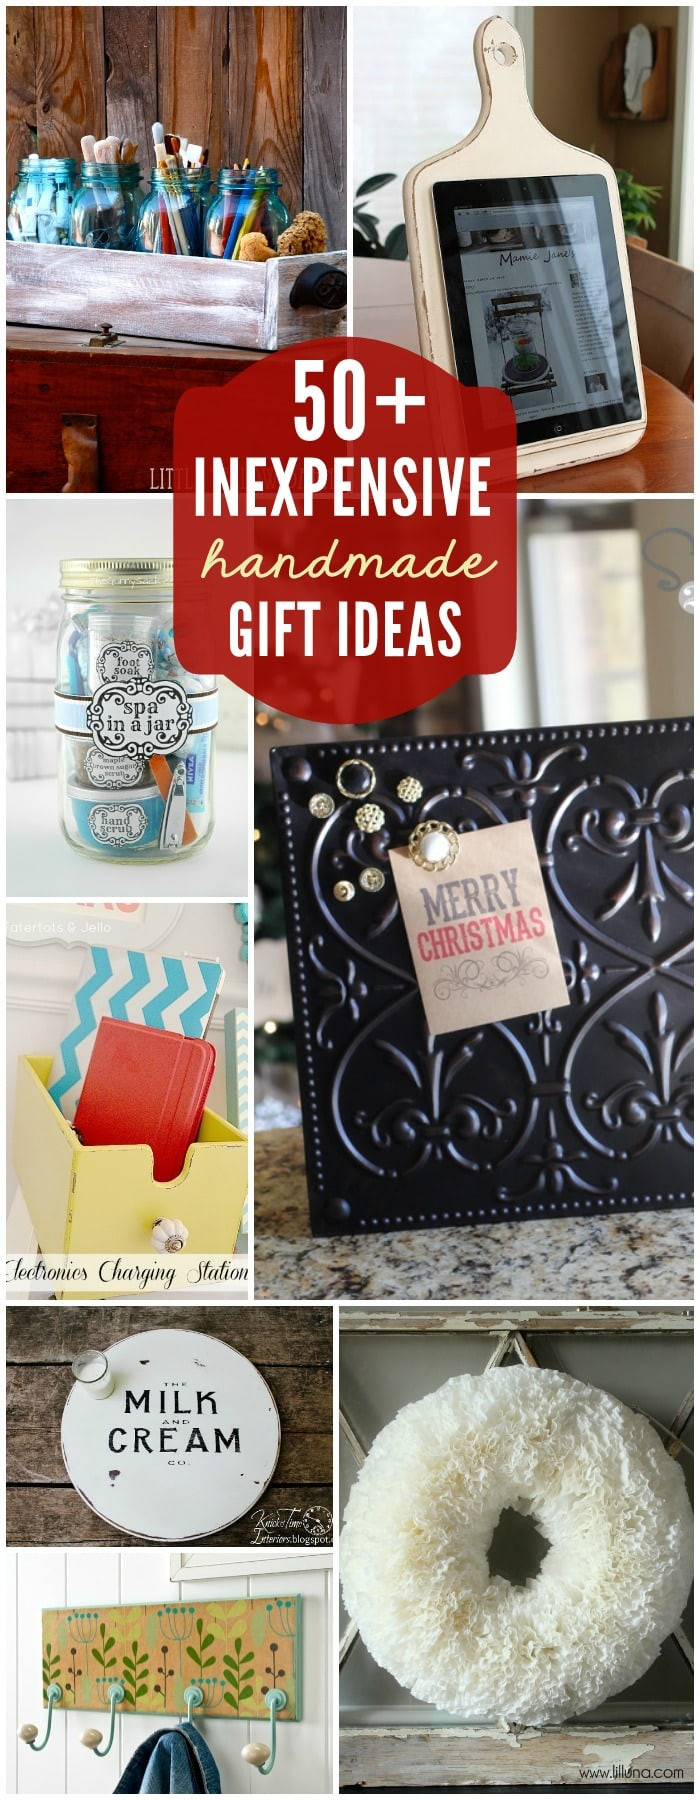 Easy DIY Christmas Gifts
 50 Inexpensive DIY Gift Ideas